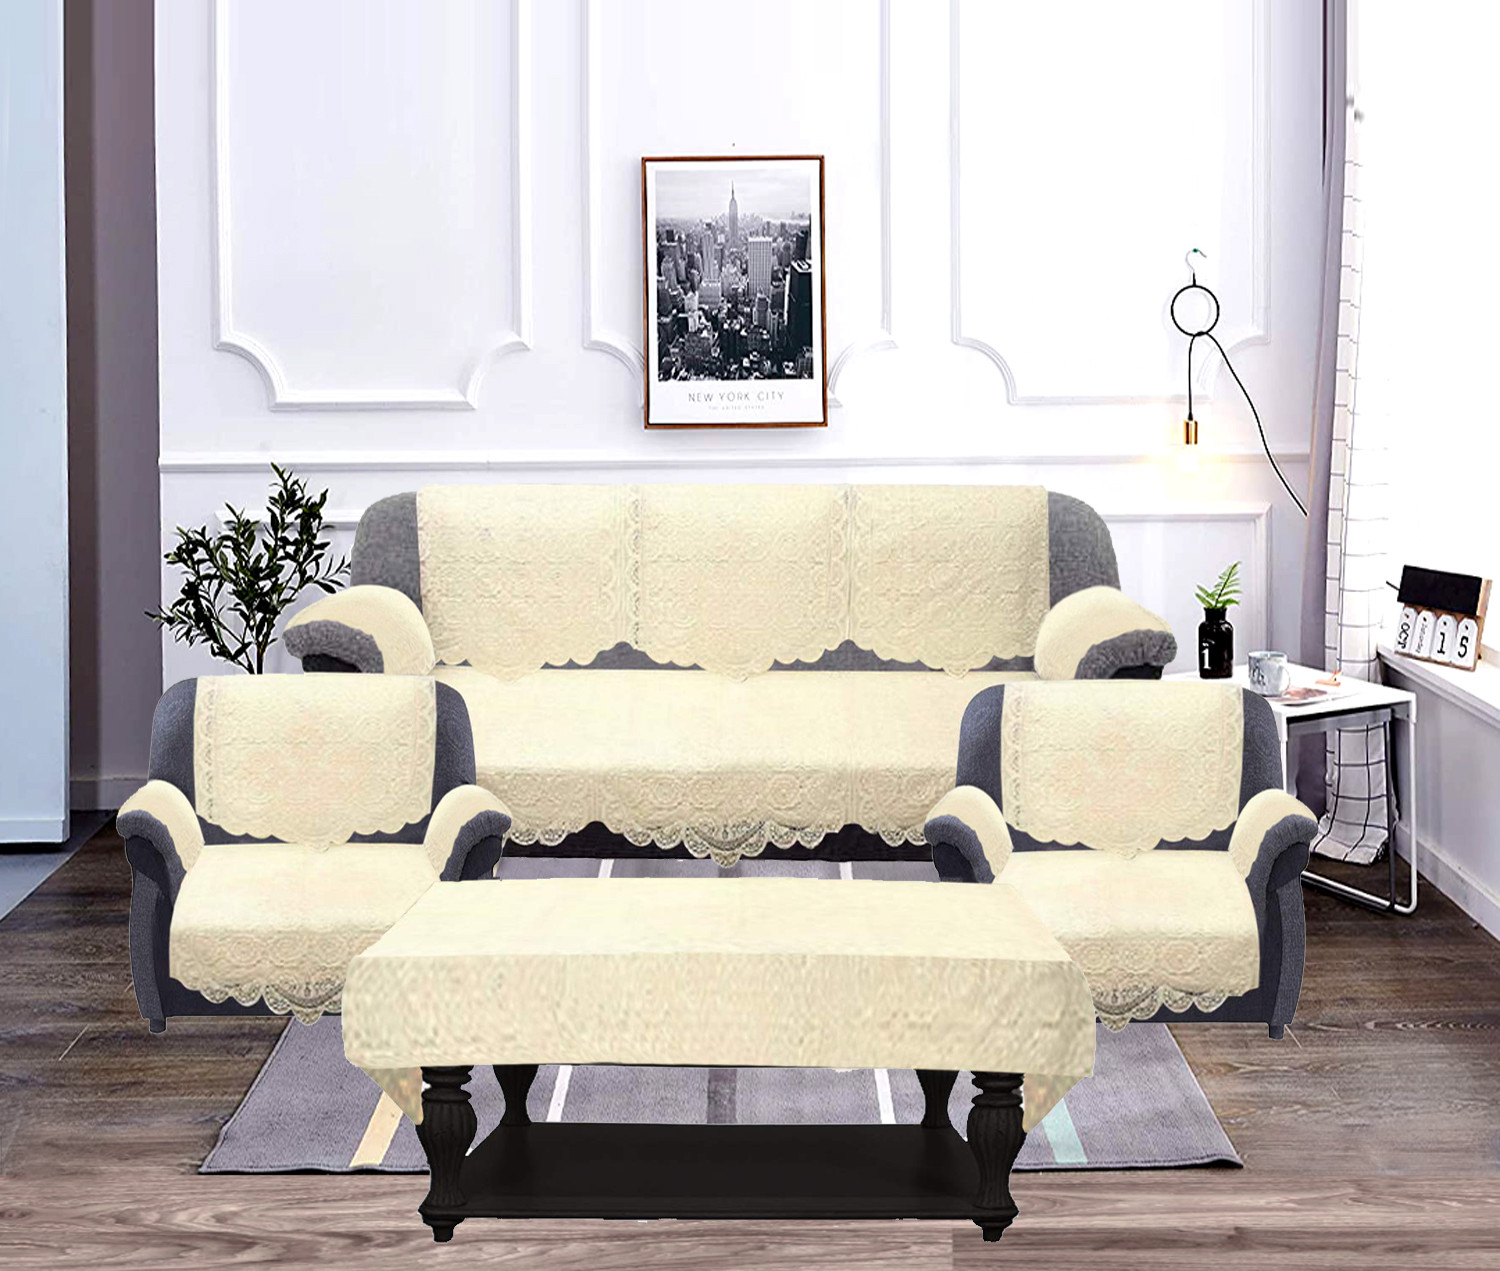 Kuber Industries Circle Design Cotton 5 Seater Sofa Cover With 6 Pieces Arms cover And 1 Center Table Cover Use Both Side, Living Room, Drawing Room, Bedroom, Guest Room (Set Of17, Cream)-KUBMRT11997